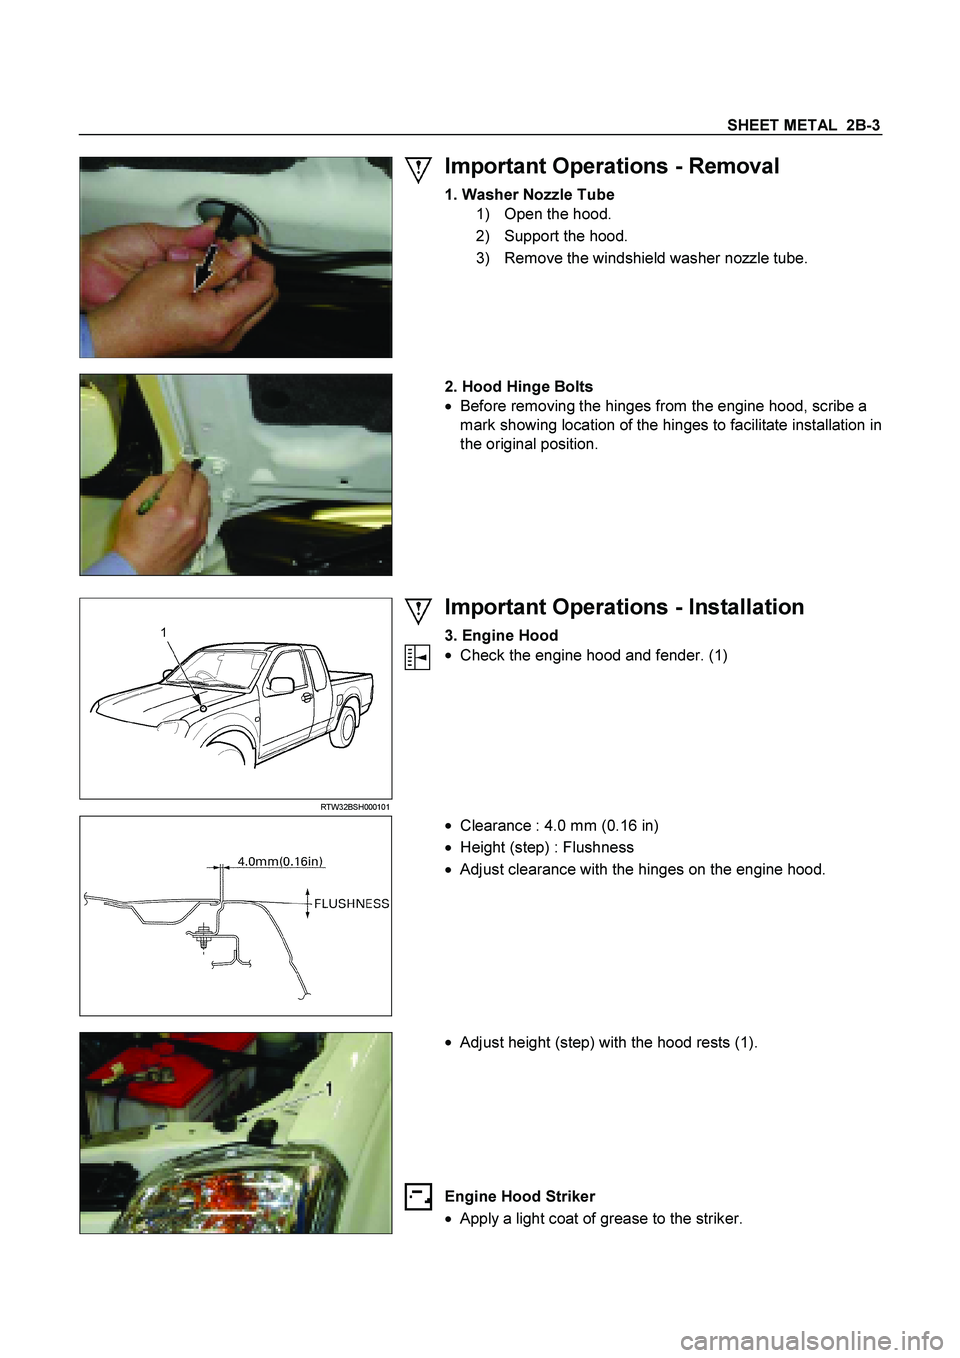 ISUZU TF SERIES 2004  Workshop Manual SHEET METAL  2B-3
 
  
 
Important Operations - Removal 
1. Washer Nozzle Tube
 
1) Open the hood. 
2)  Support the hood. 
3)  Remove the windshield washer nozzle tube. 
 
 
 
  
2. Hood Hinge Bolts
 